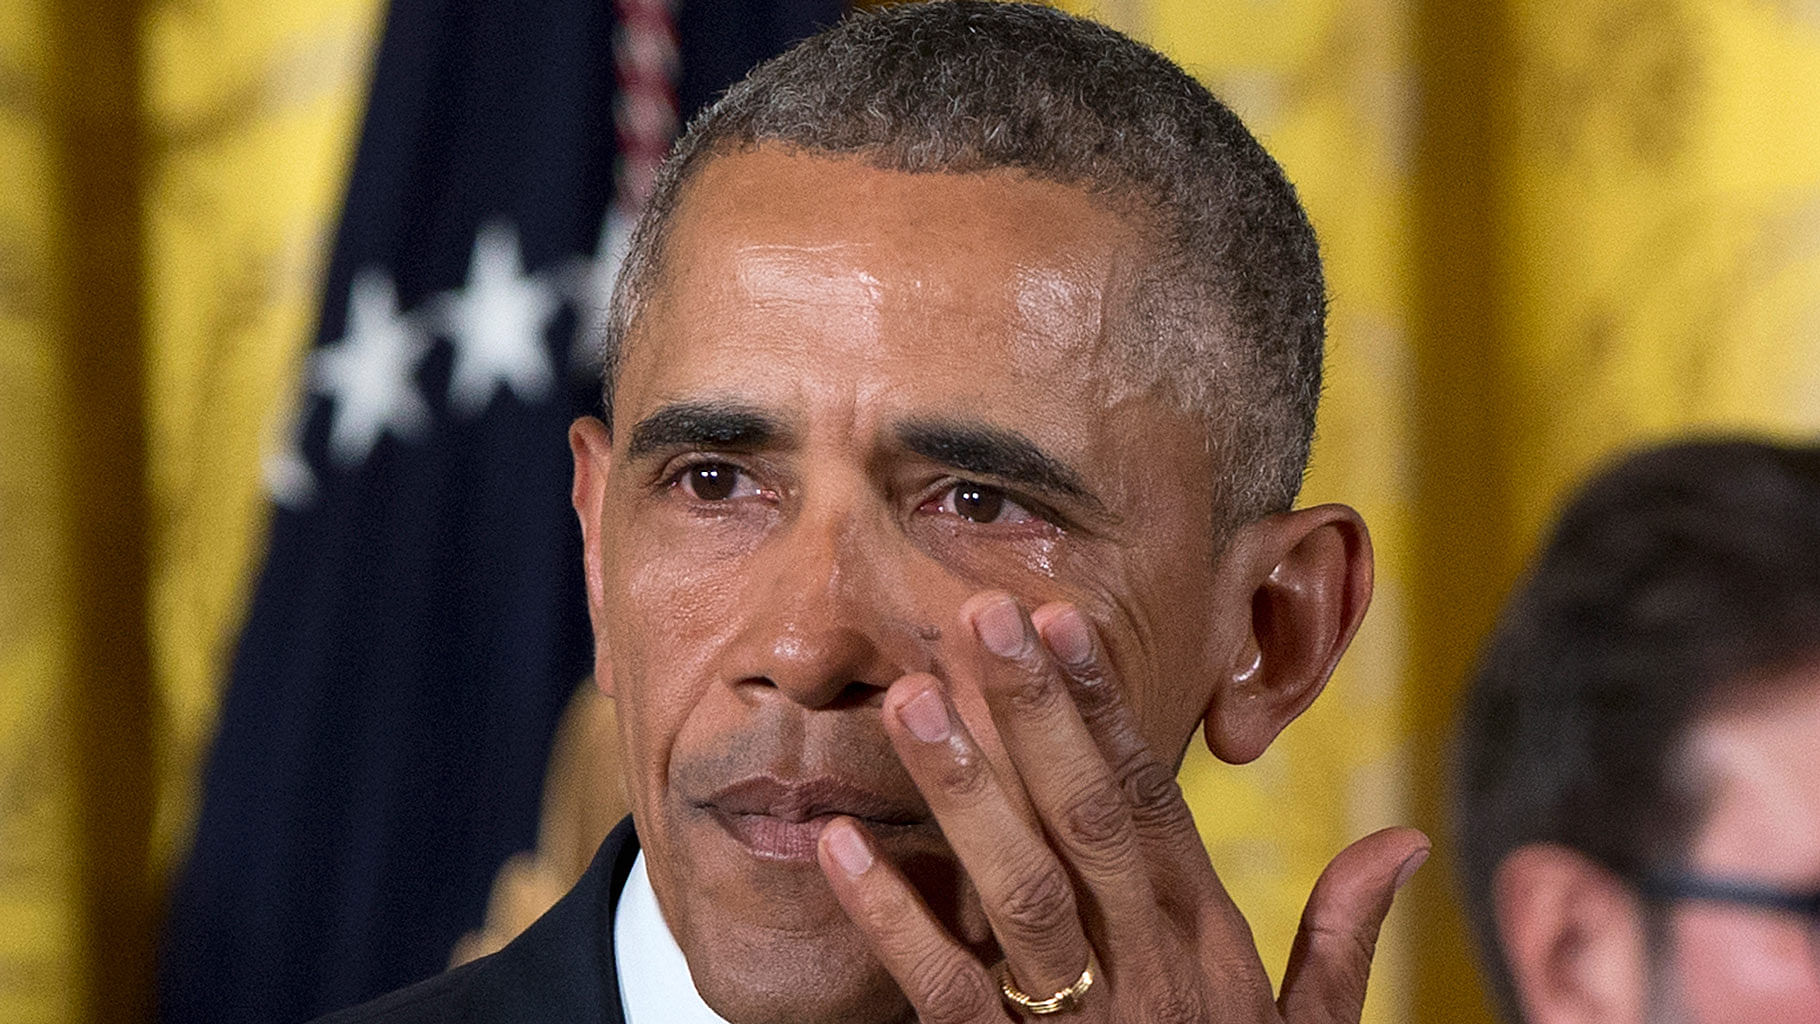 An emotional Obama appeals to Congress not to let gun control take America hostage. (Photo: AP)